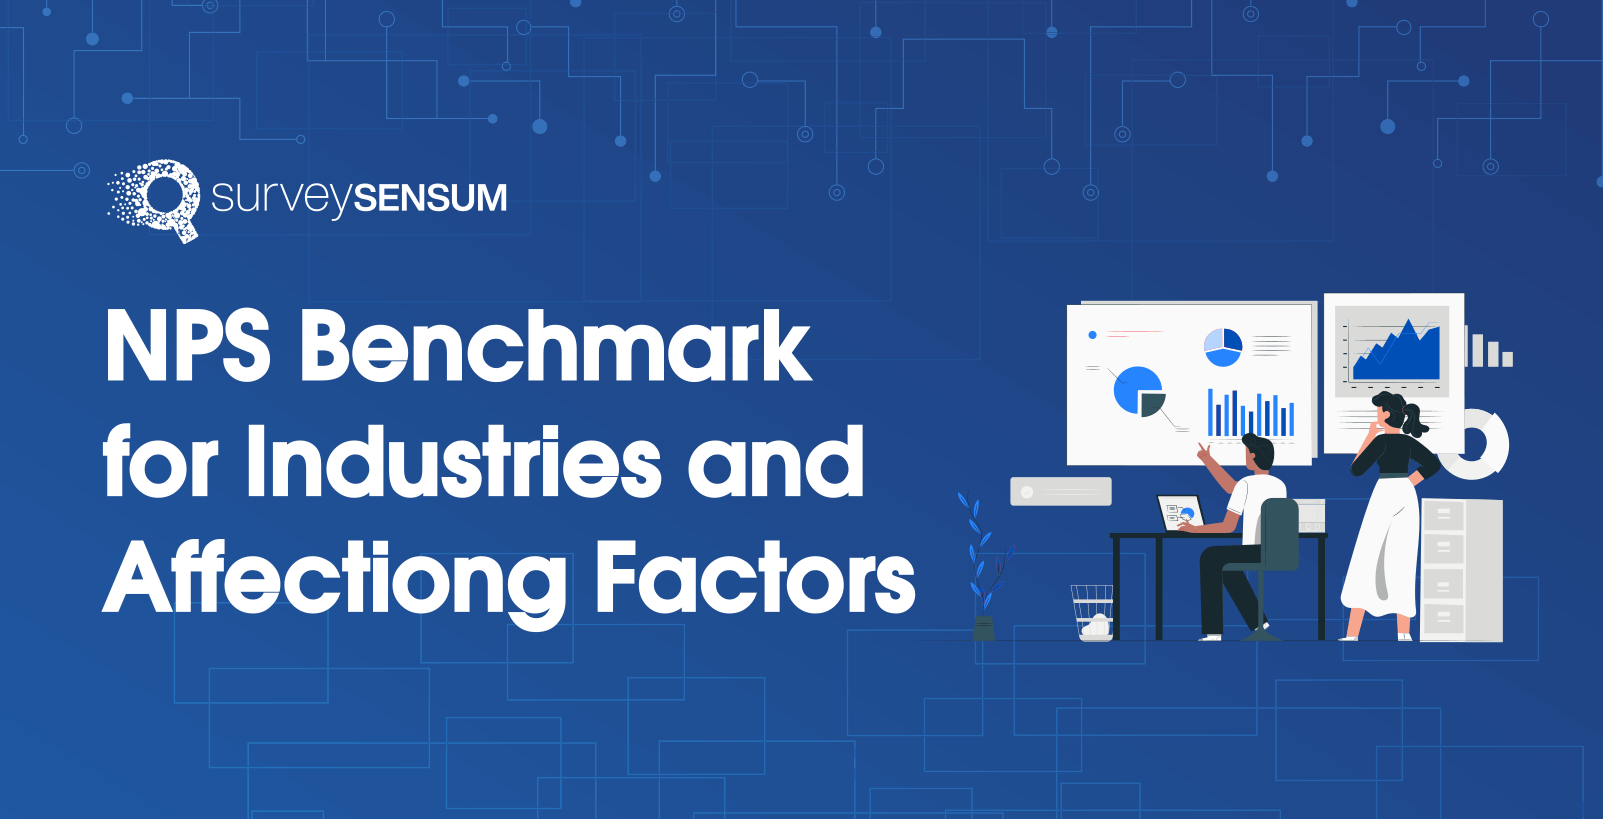 NPS Benchmark for Industries and the Affecting Factors